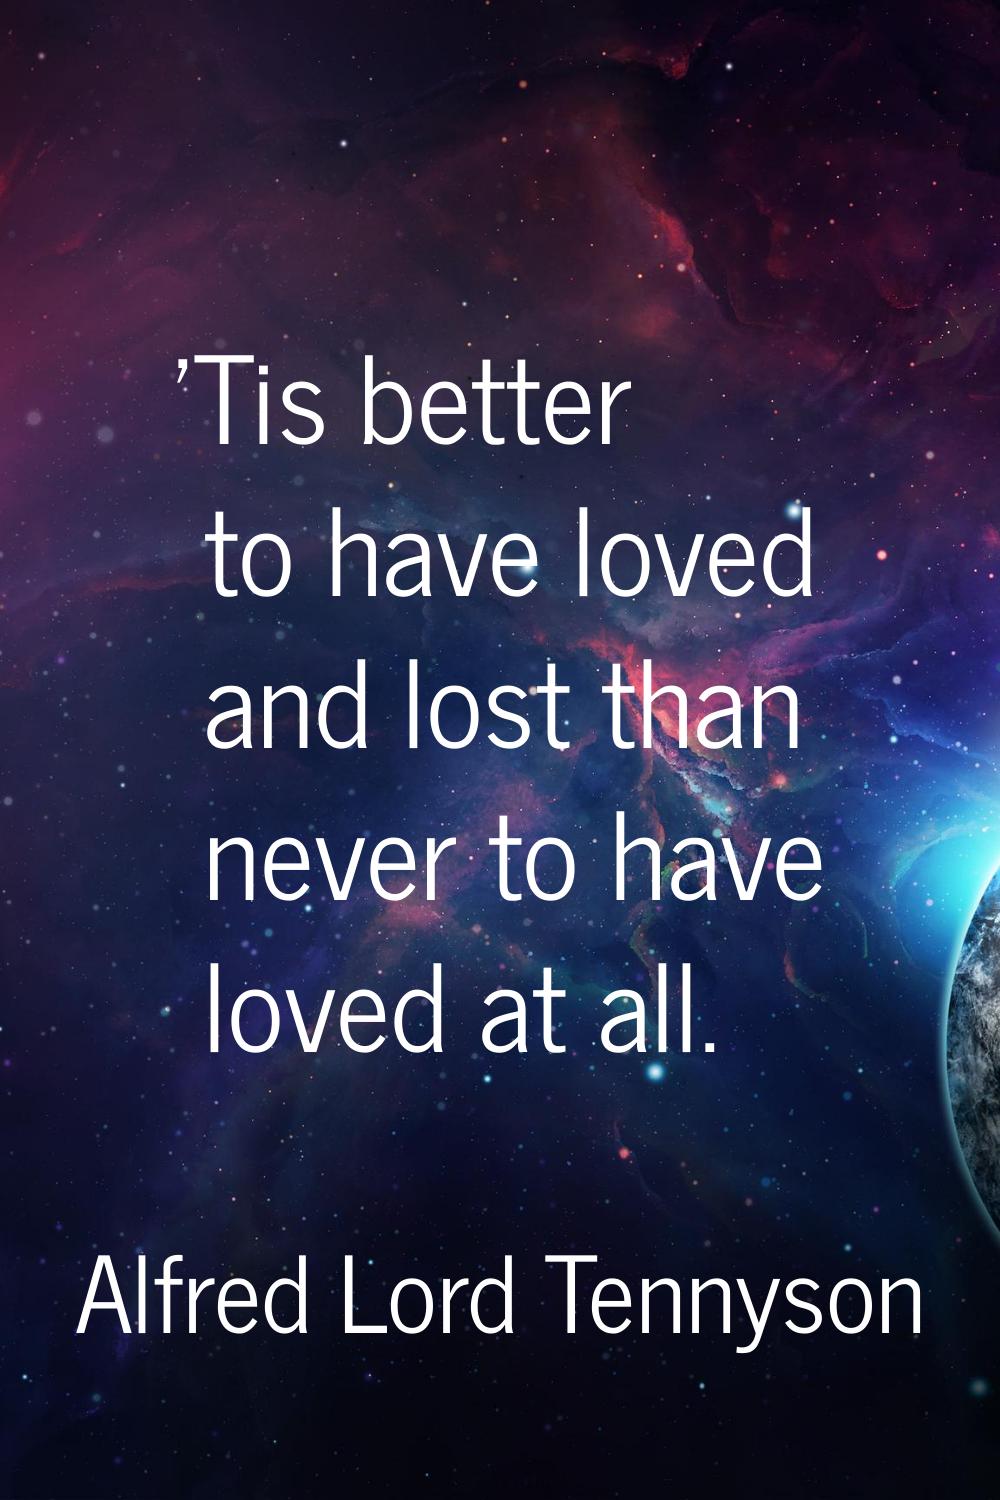 'Tis better to have loved and lost than never to have loved at all.